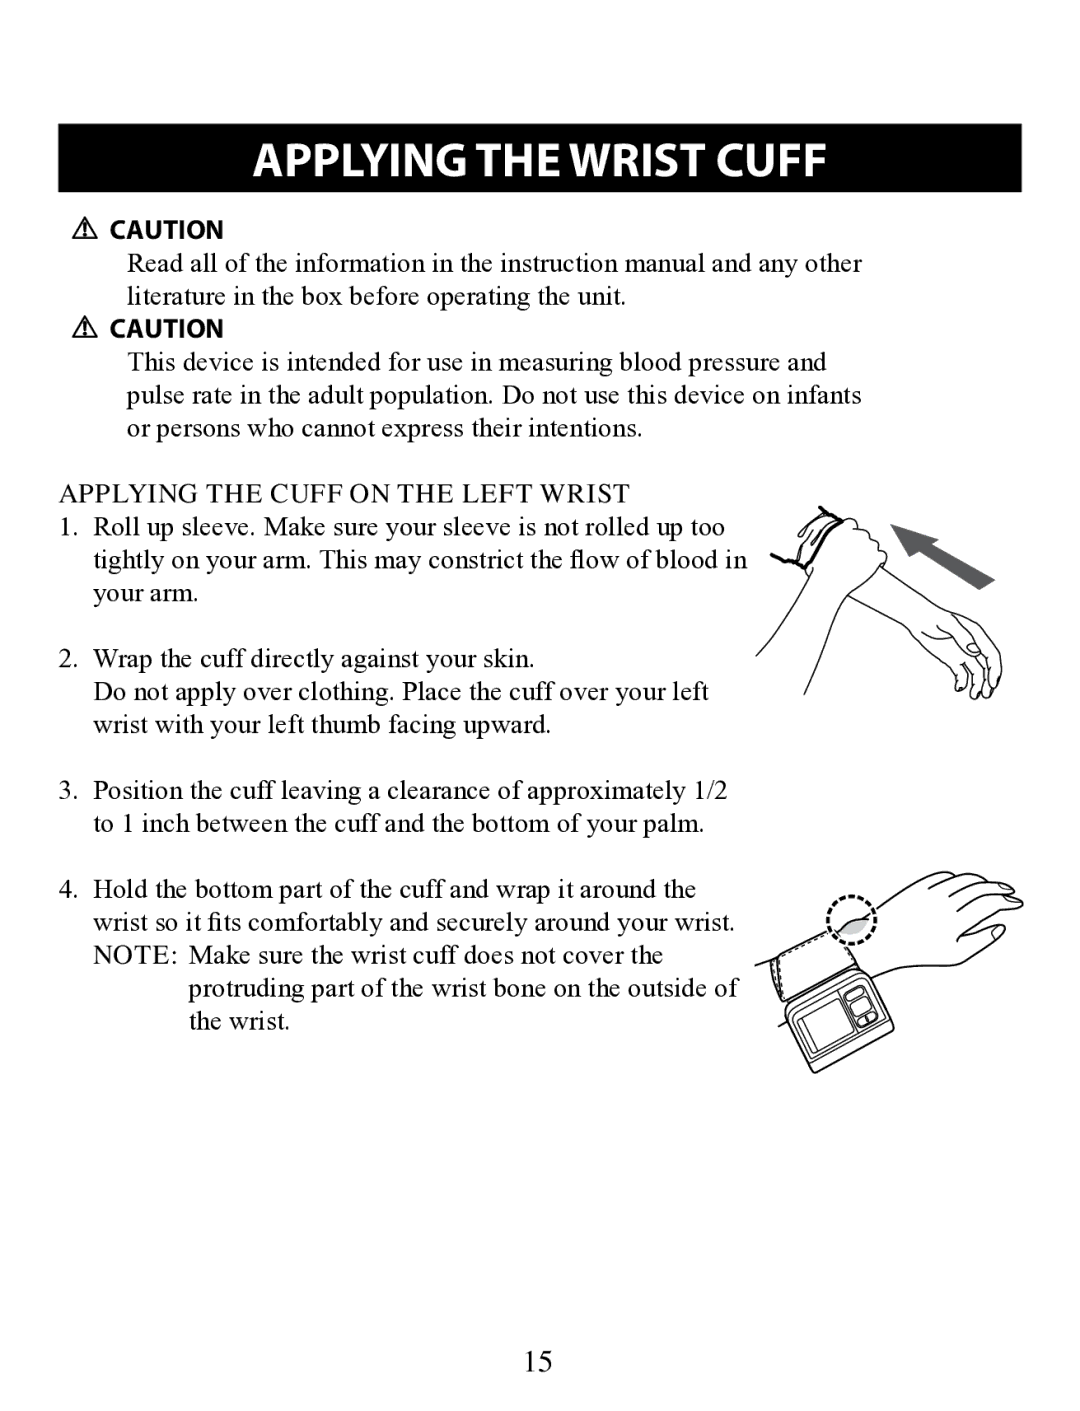 Omron Healthcare BP629 instruction manual Applying the Wrist Cuff, Applying the Cuff on the Left Wrist 